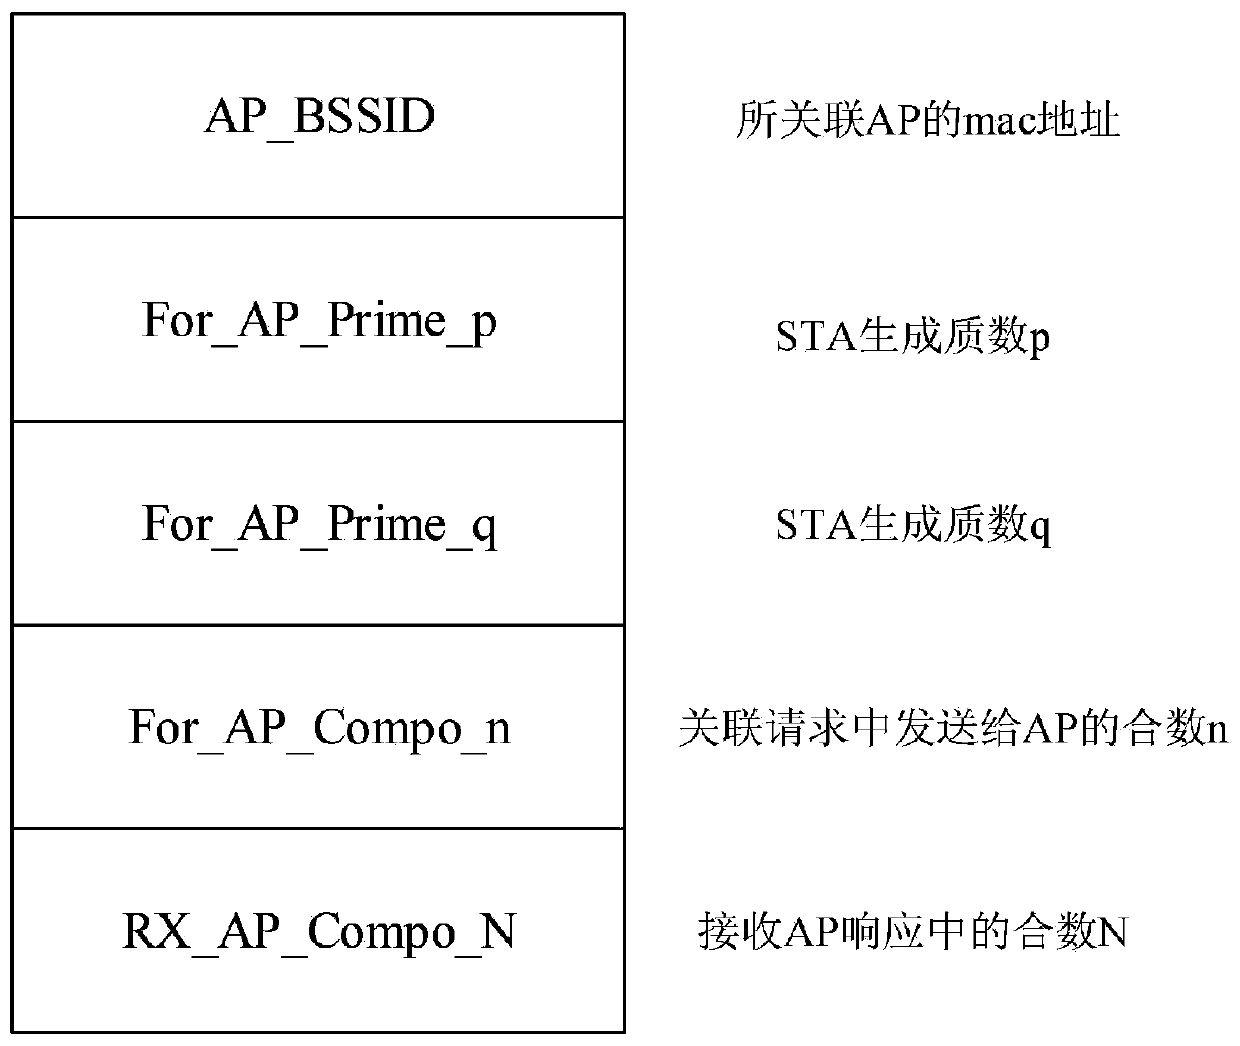 A method of preventing wlan disconnection attack based on prime number decomposition verification